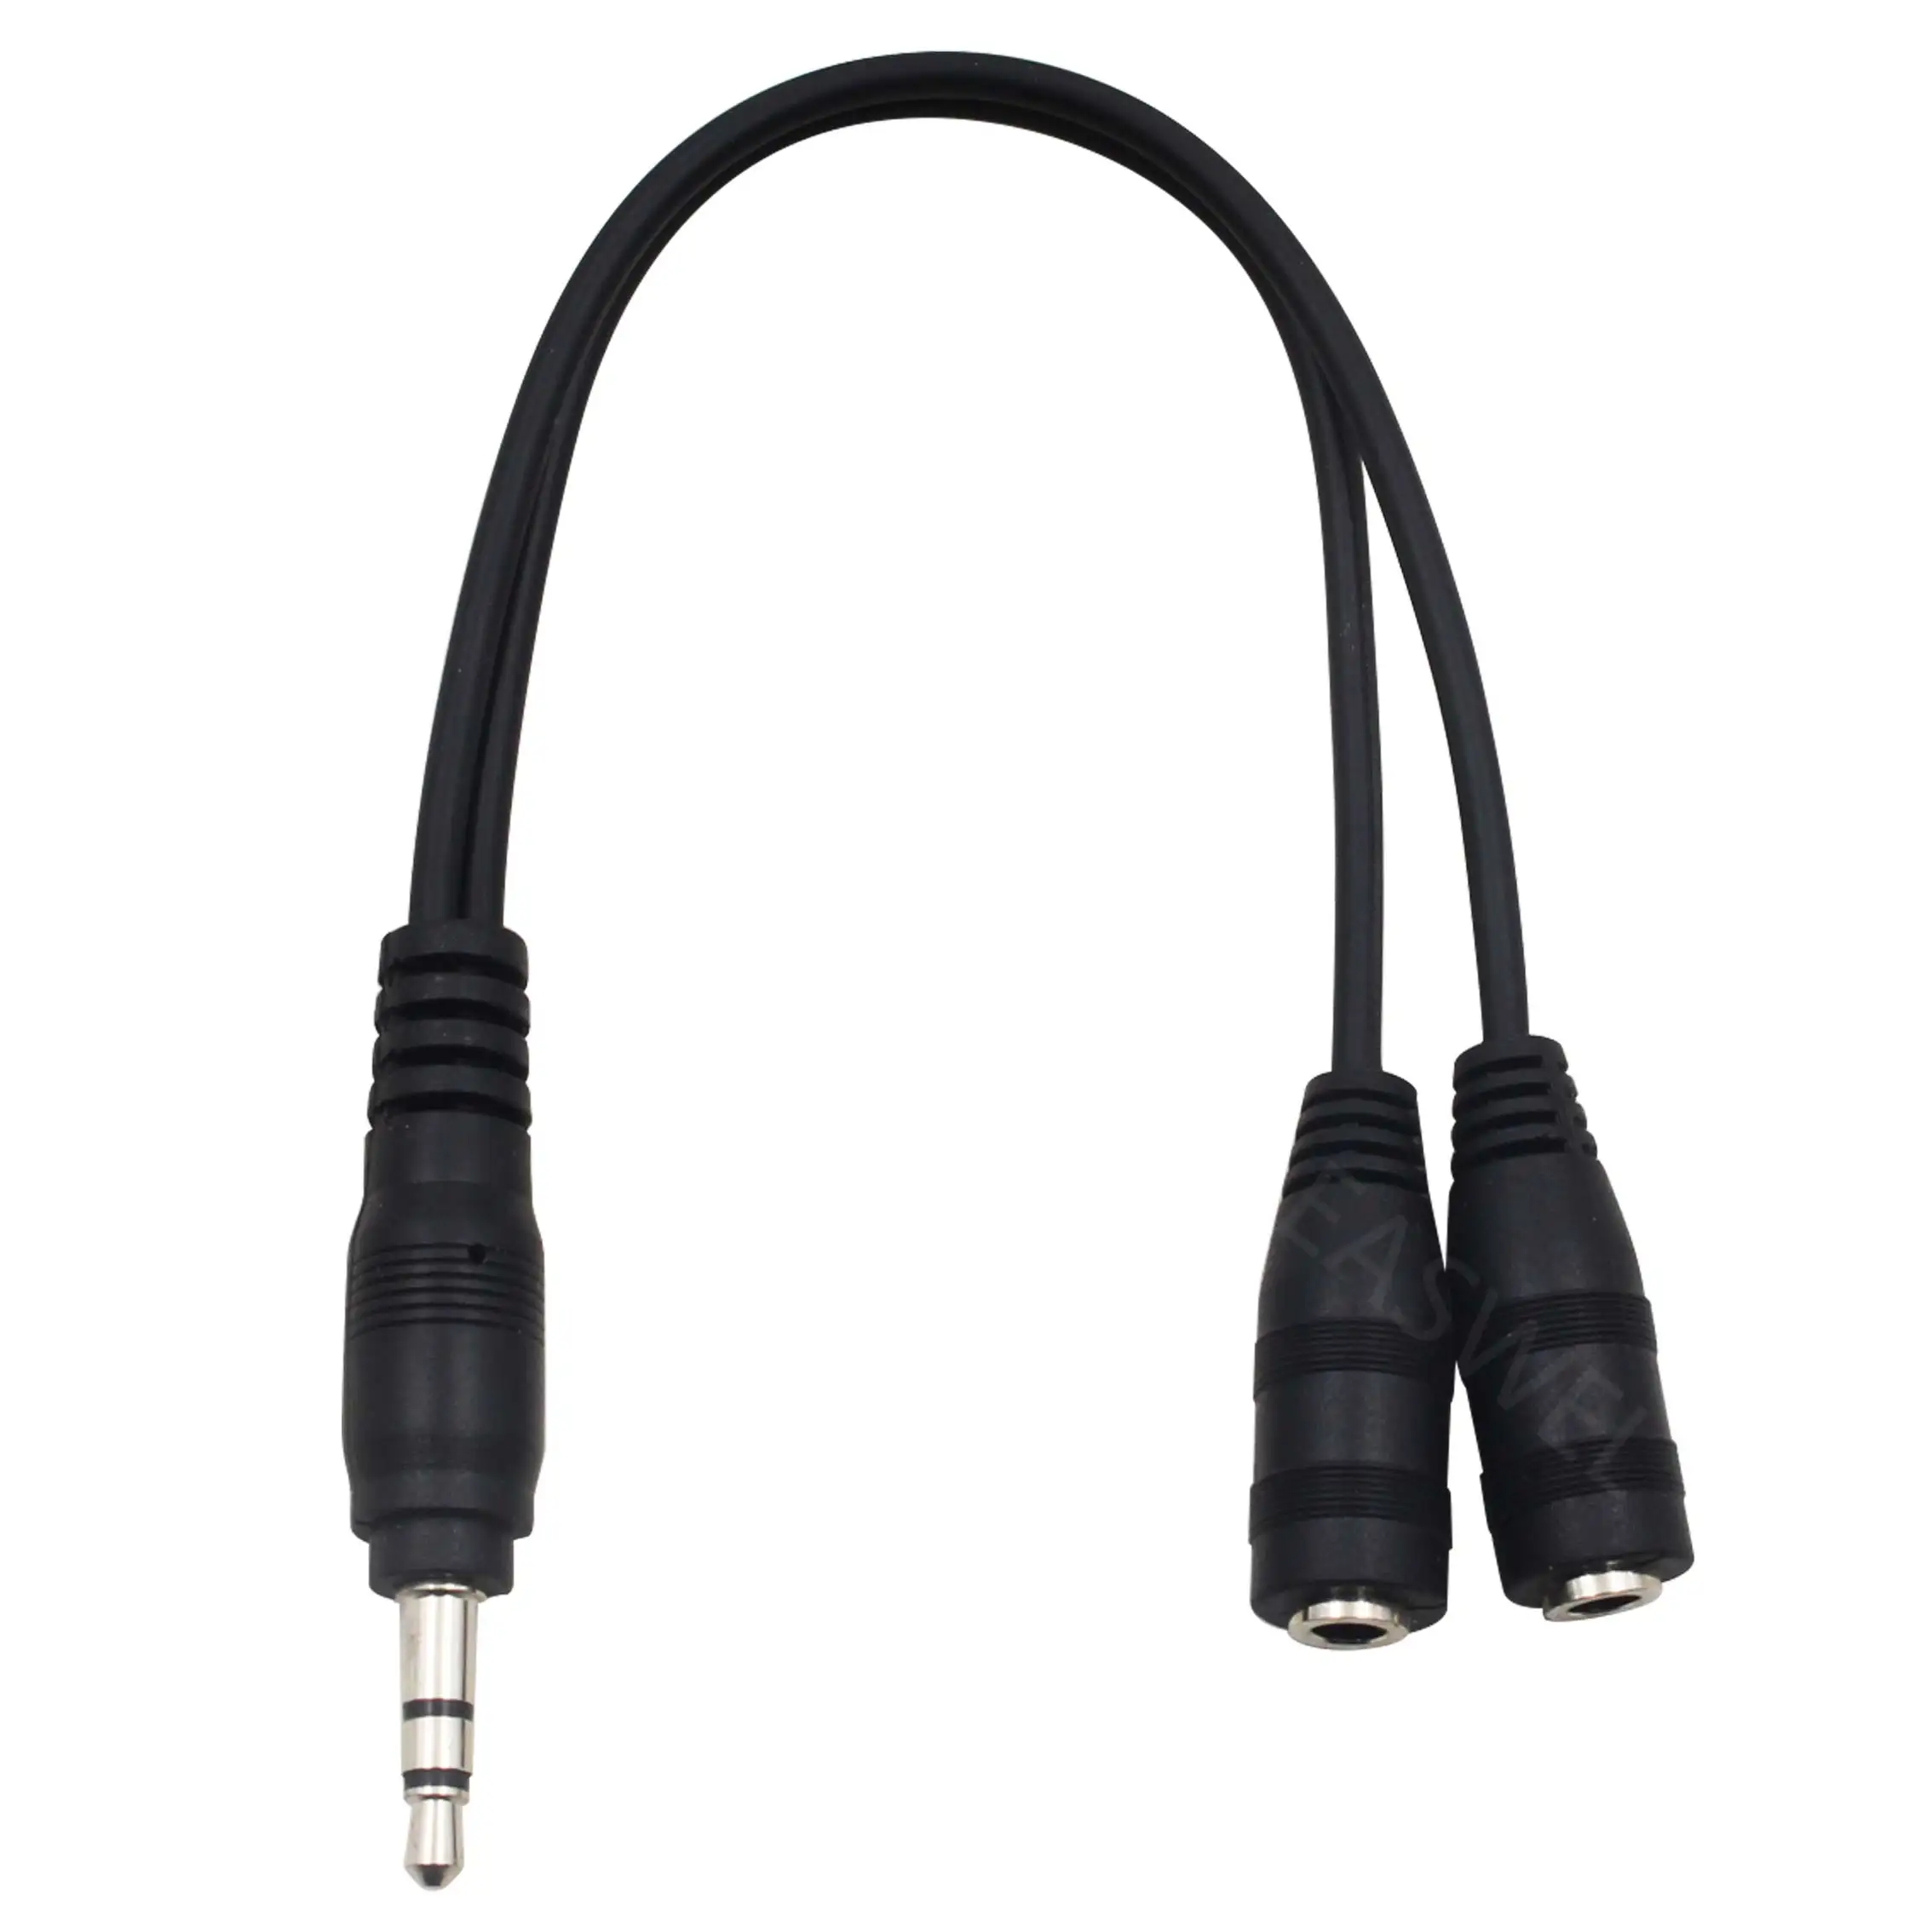 6" 1 Male to 2 Female Gold Plated 3.5mm Audio Y Splitter Headphone Cable Black 